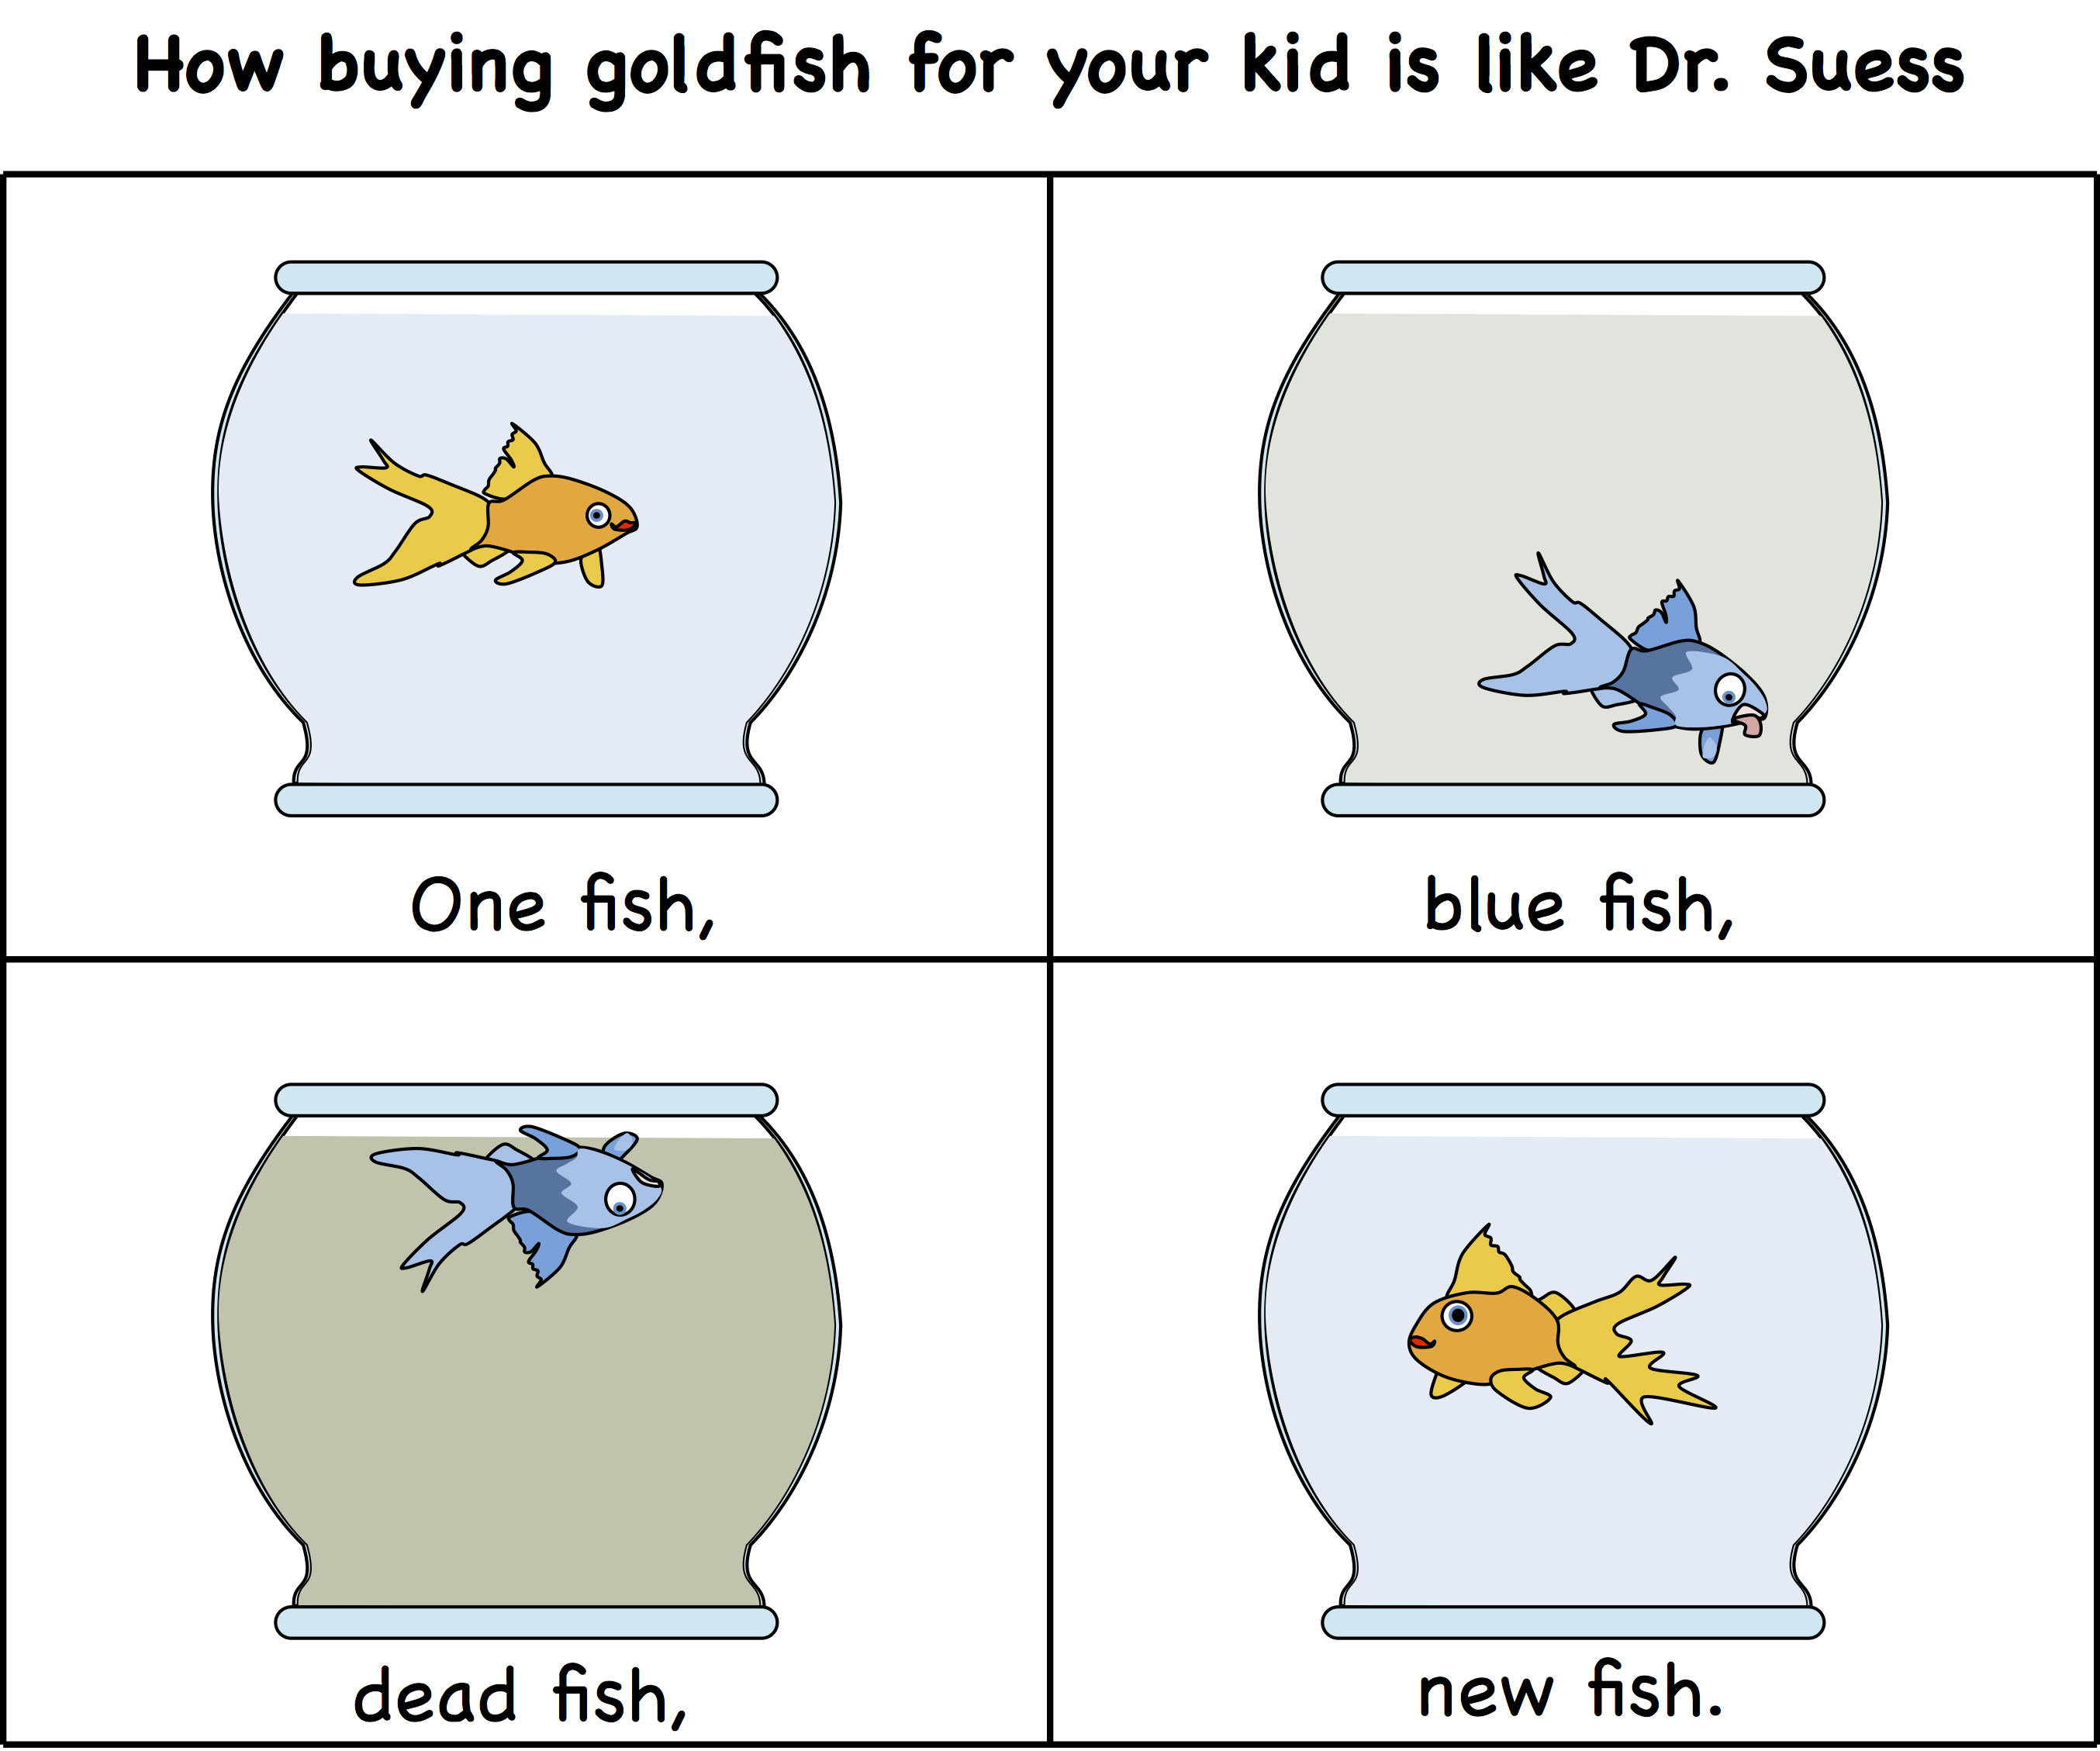 How buying goldfish for your kid is like Dr. Suess